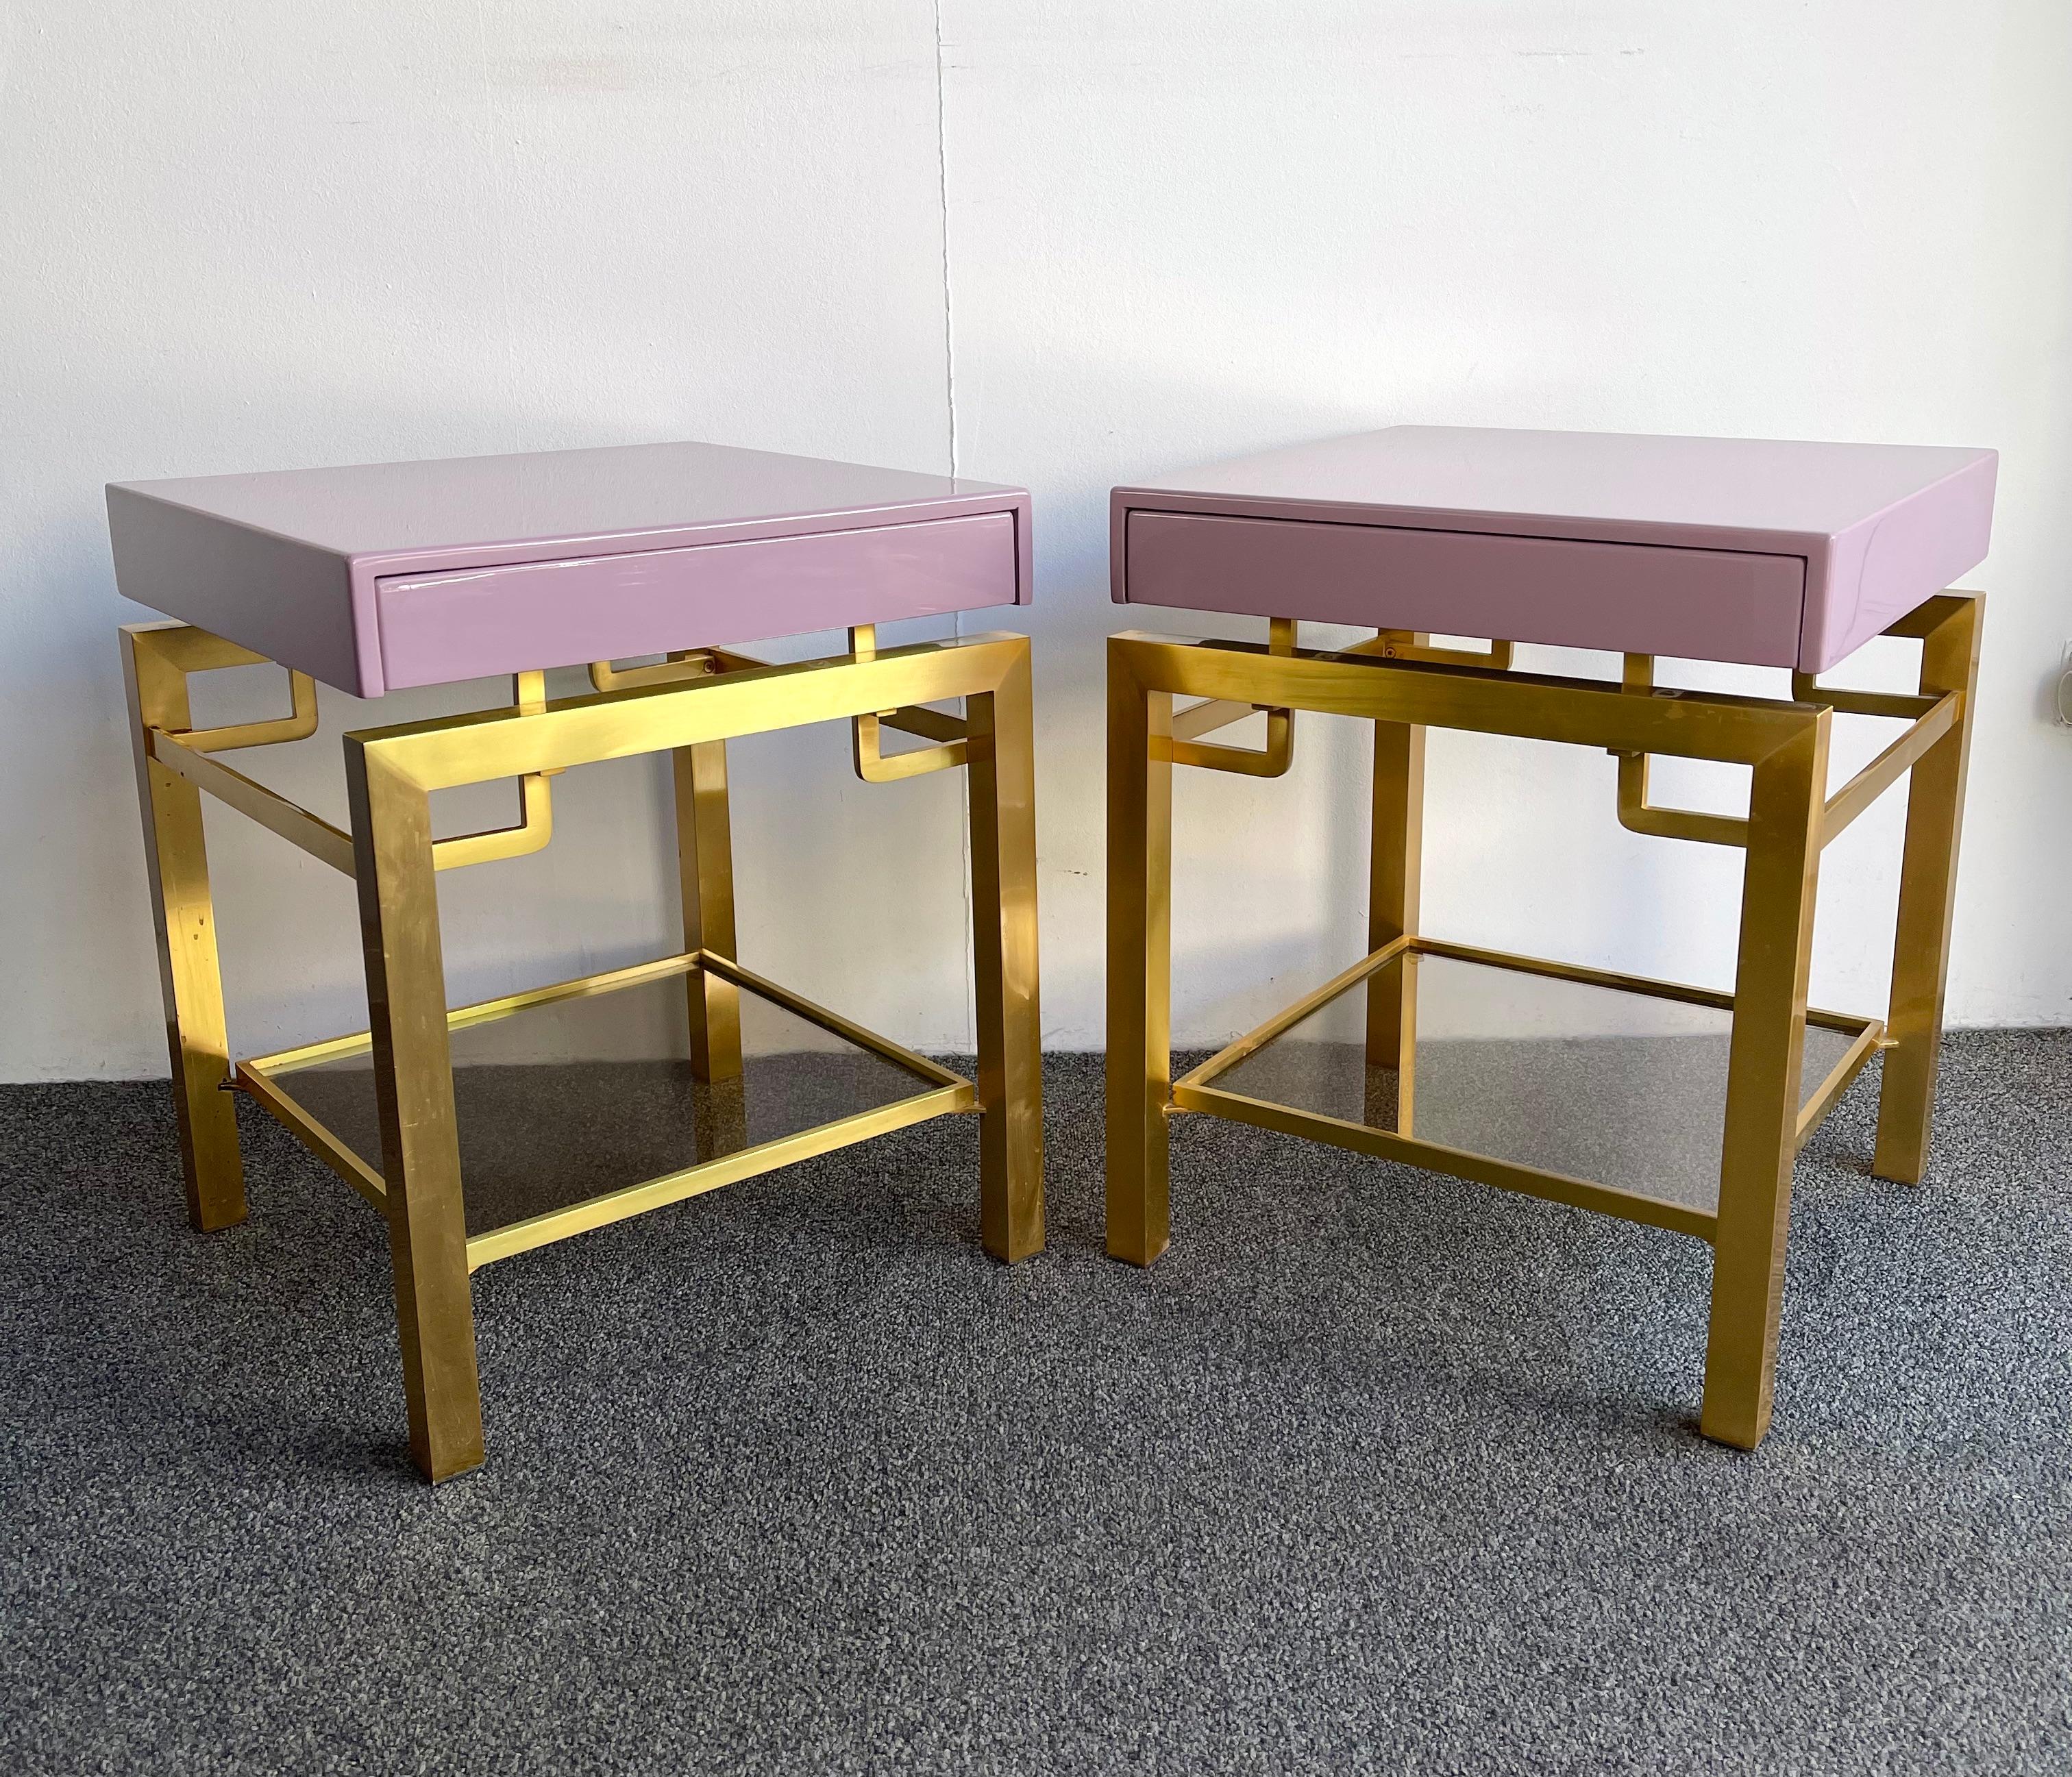 Pair of light pink parma lacquered and brass feet side end low or bedside tables nightstands by Guy Lefèvre. Nice model with drawers. A part of his production was retail by the Maison Jansen in Paris during the 1970s. Famous design like Jean Claude